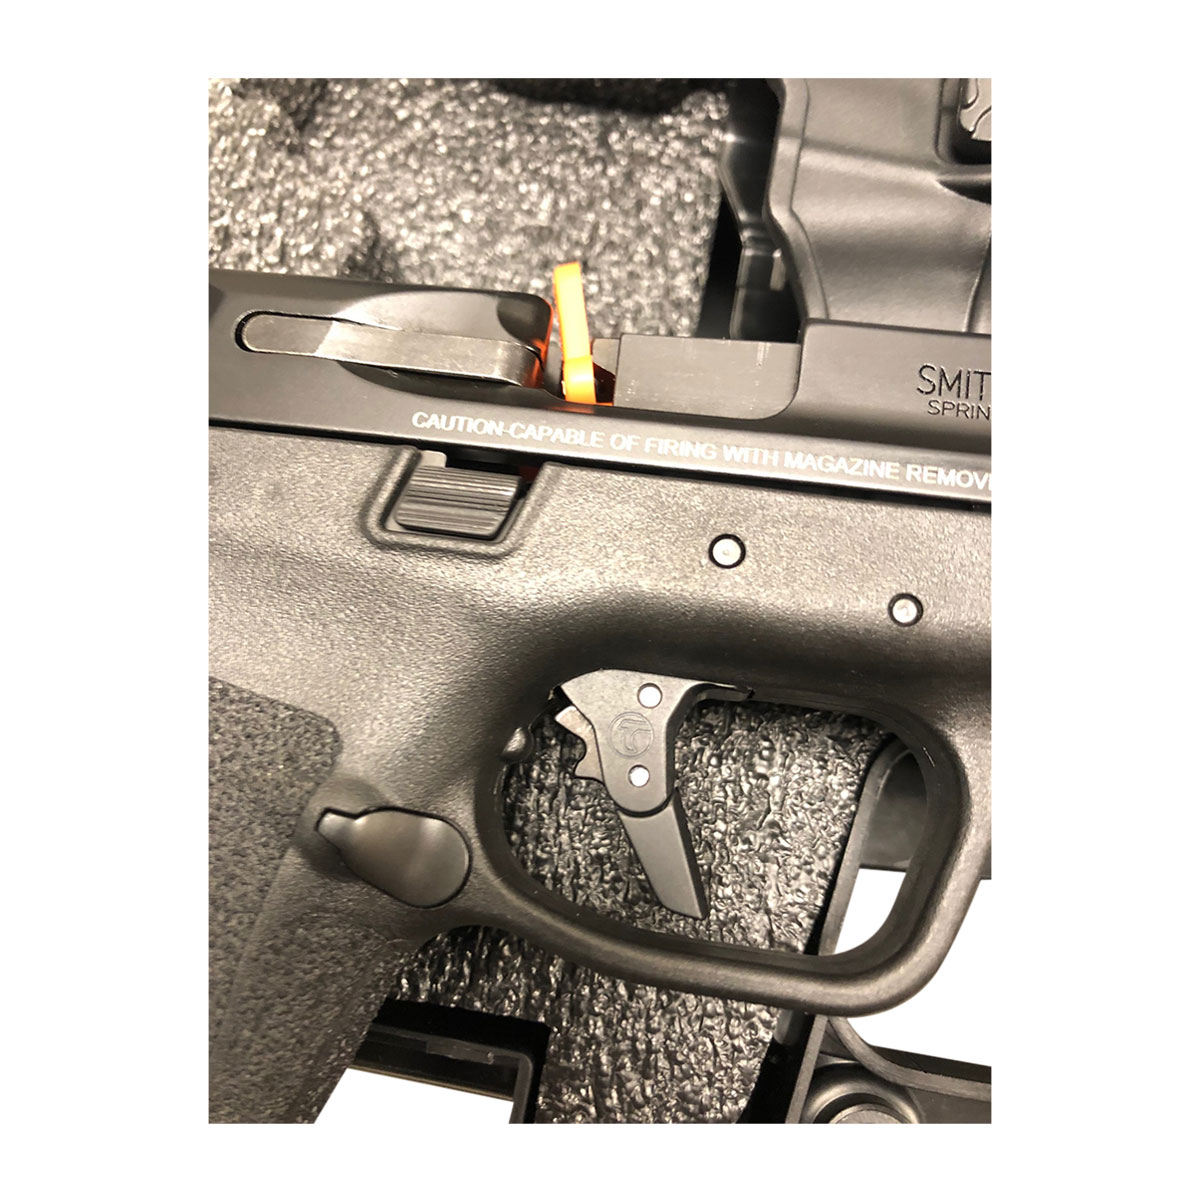 TIMNEY - ALPHA COMPETITION TRIGGER FOR SMITH & WESSON M&P